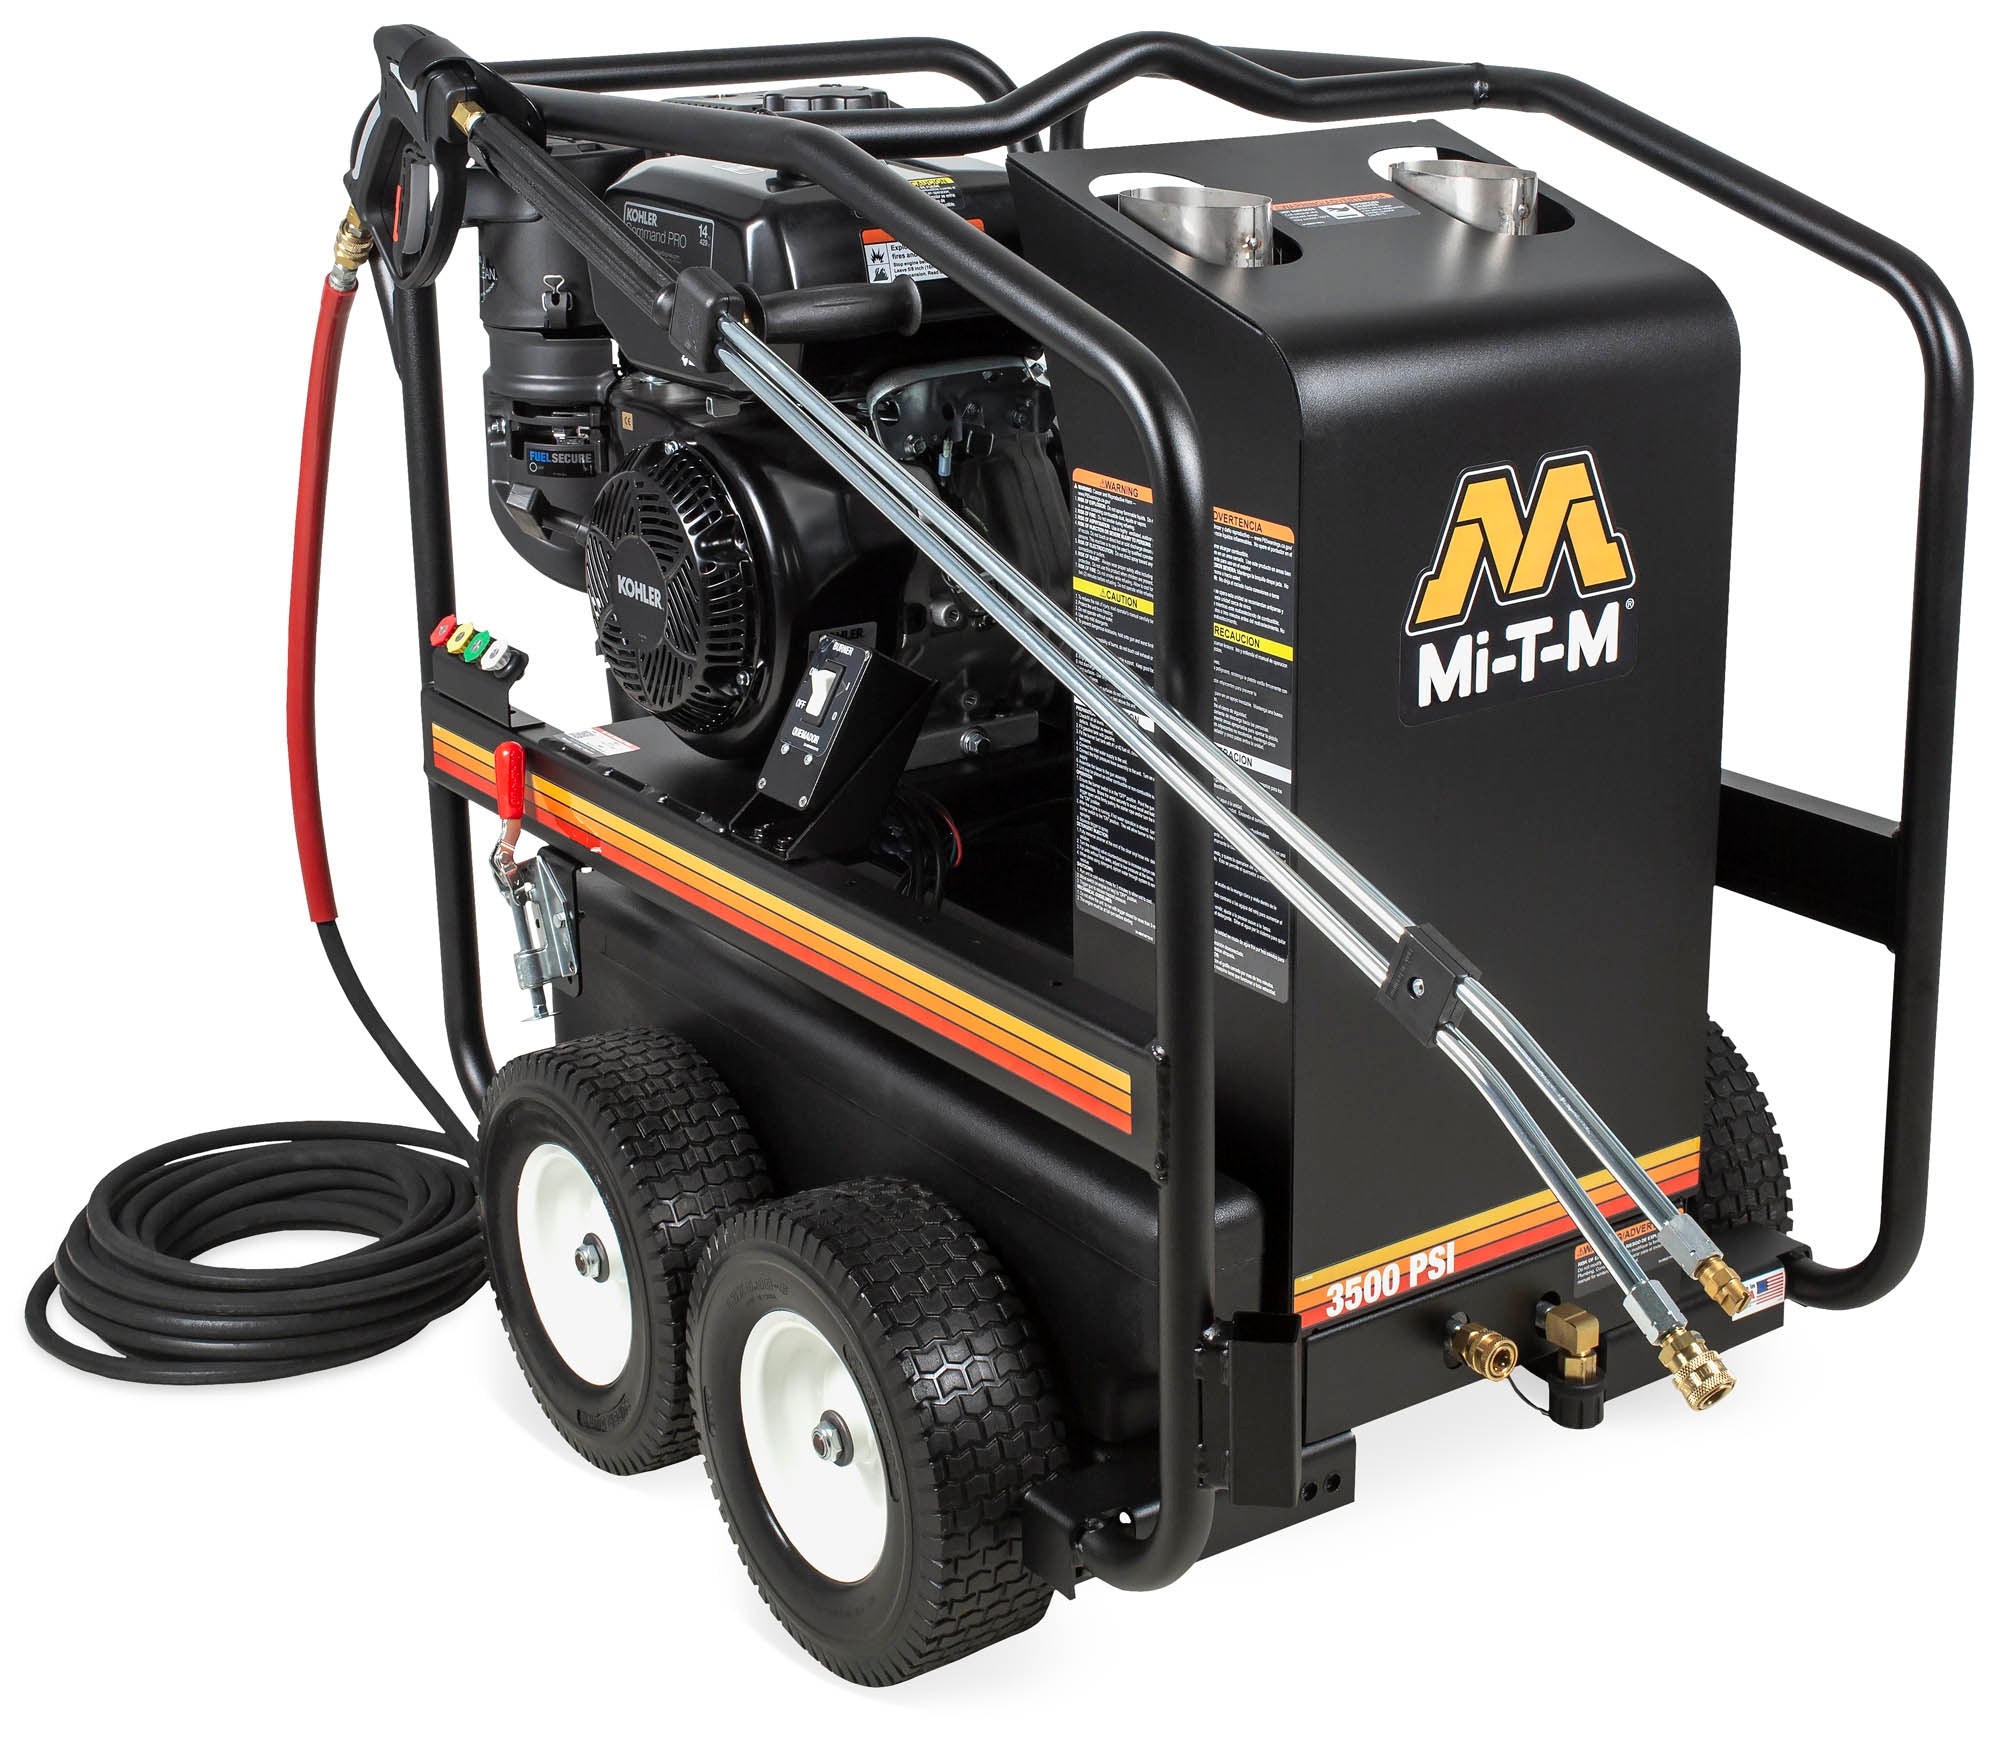 3500 PSI @ 3.3 GPM Direct Drive Kohler CH440 Gas Hot Water Pressure Washer w/ AR Pump (HSP)